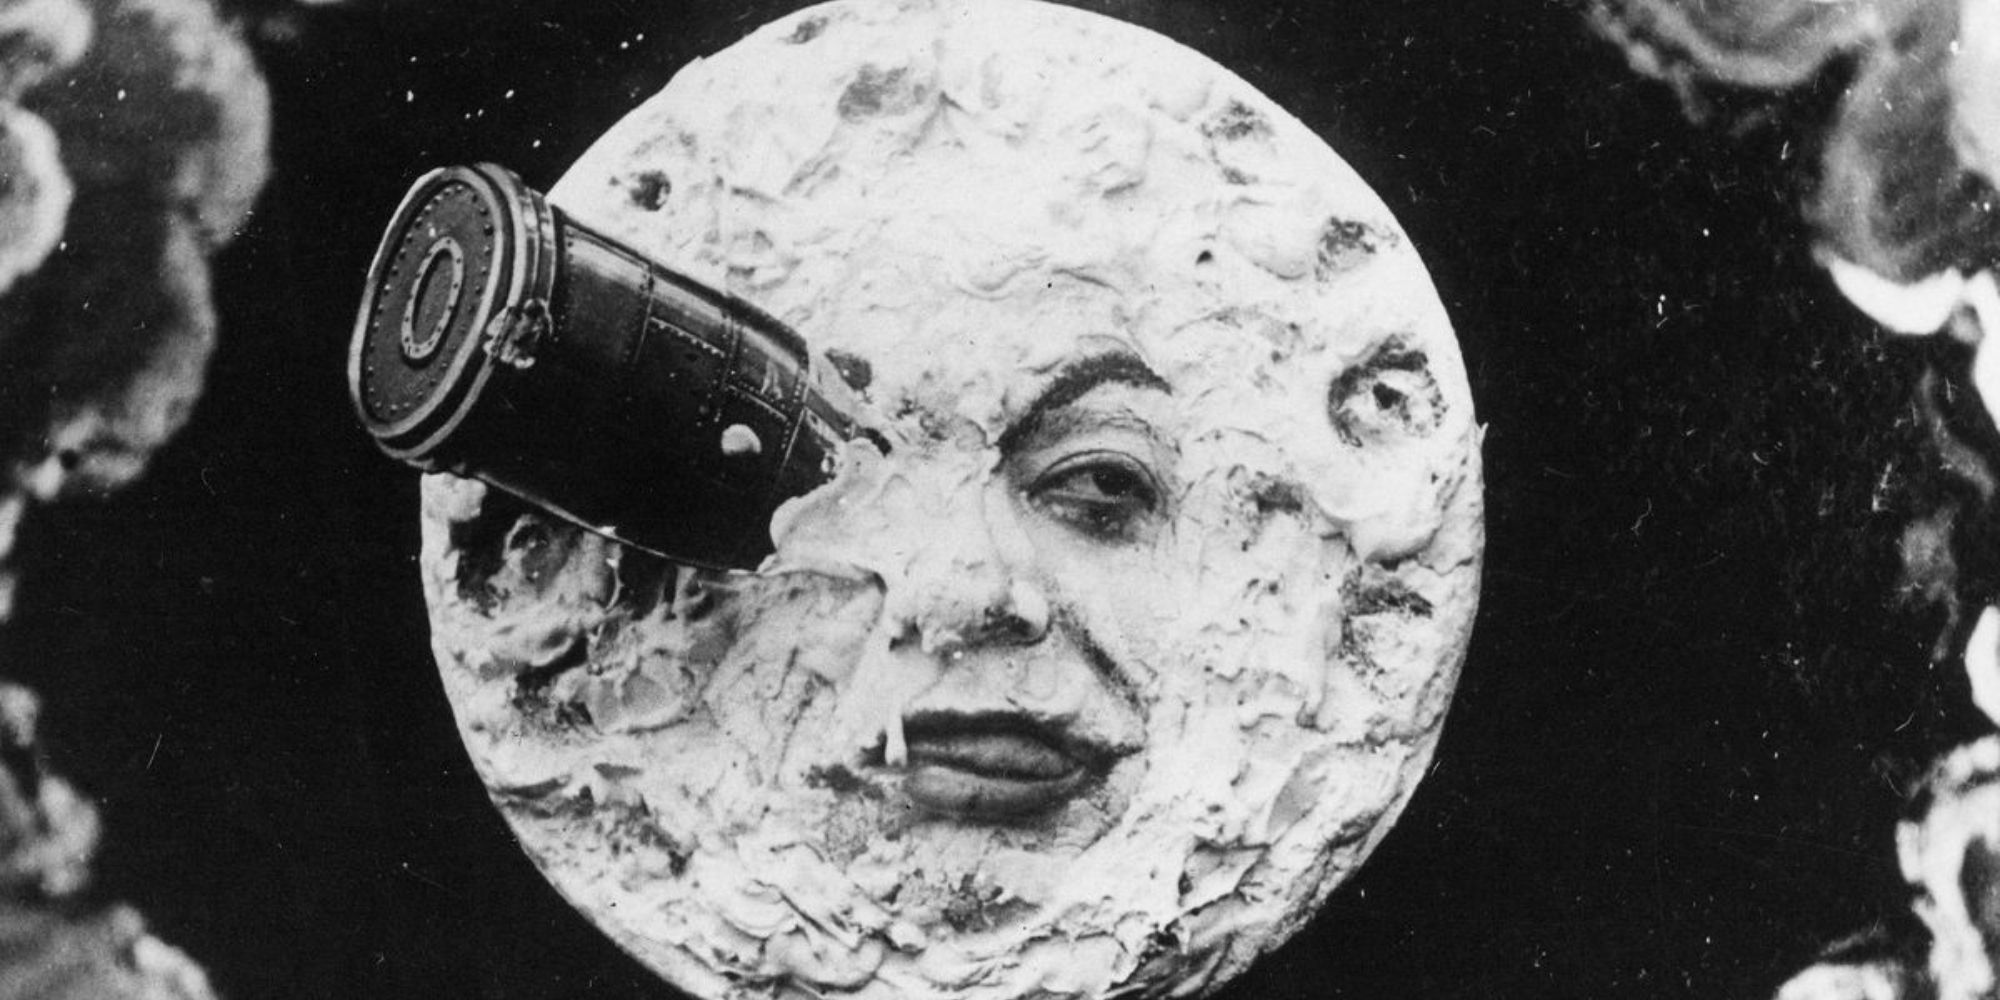 A rocket hits the moon on its eye in George Melies' A Trip to the Moon.